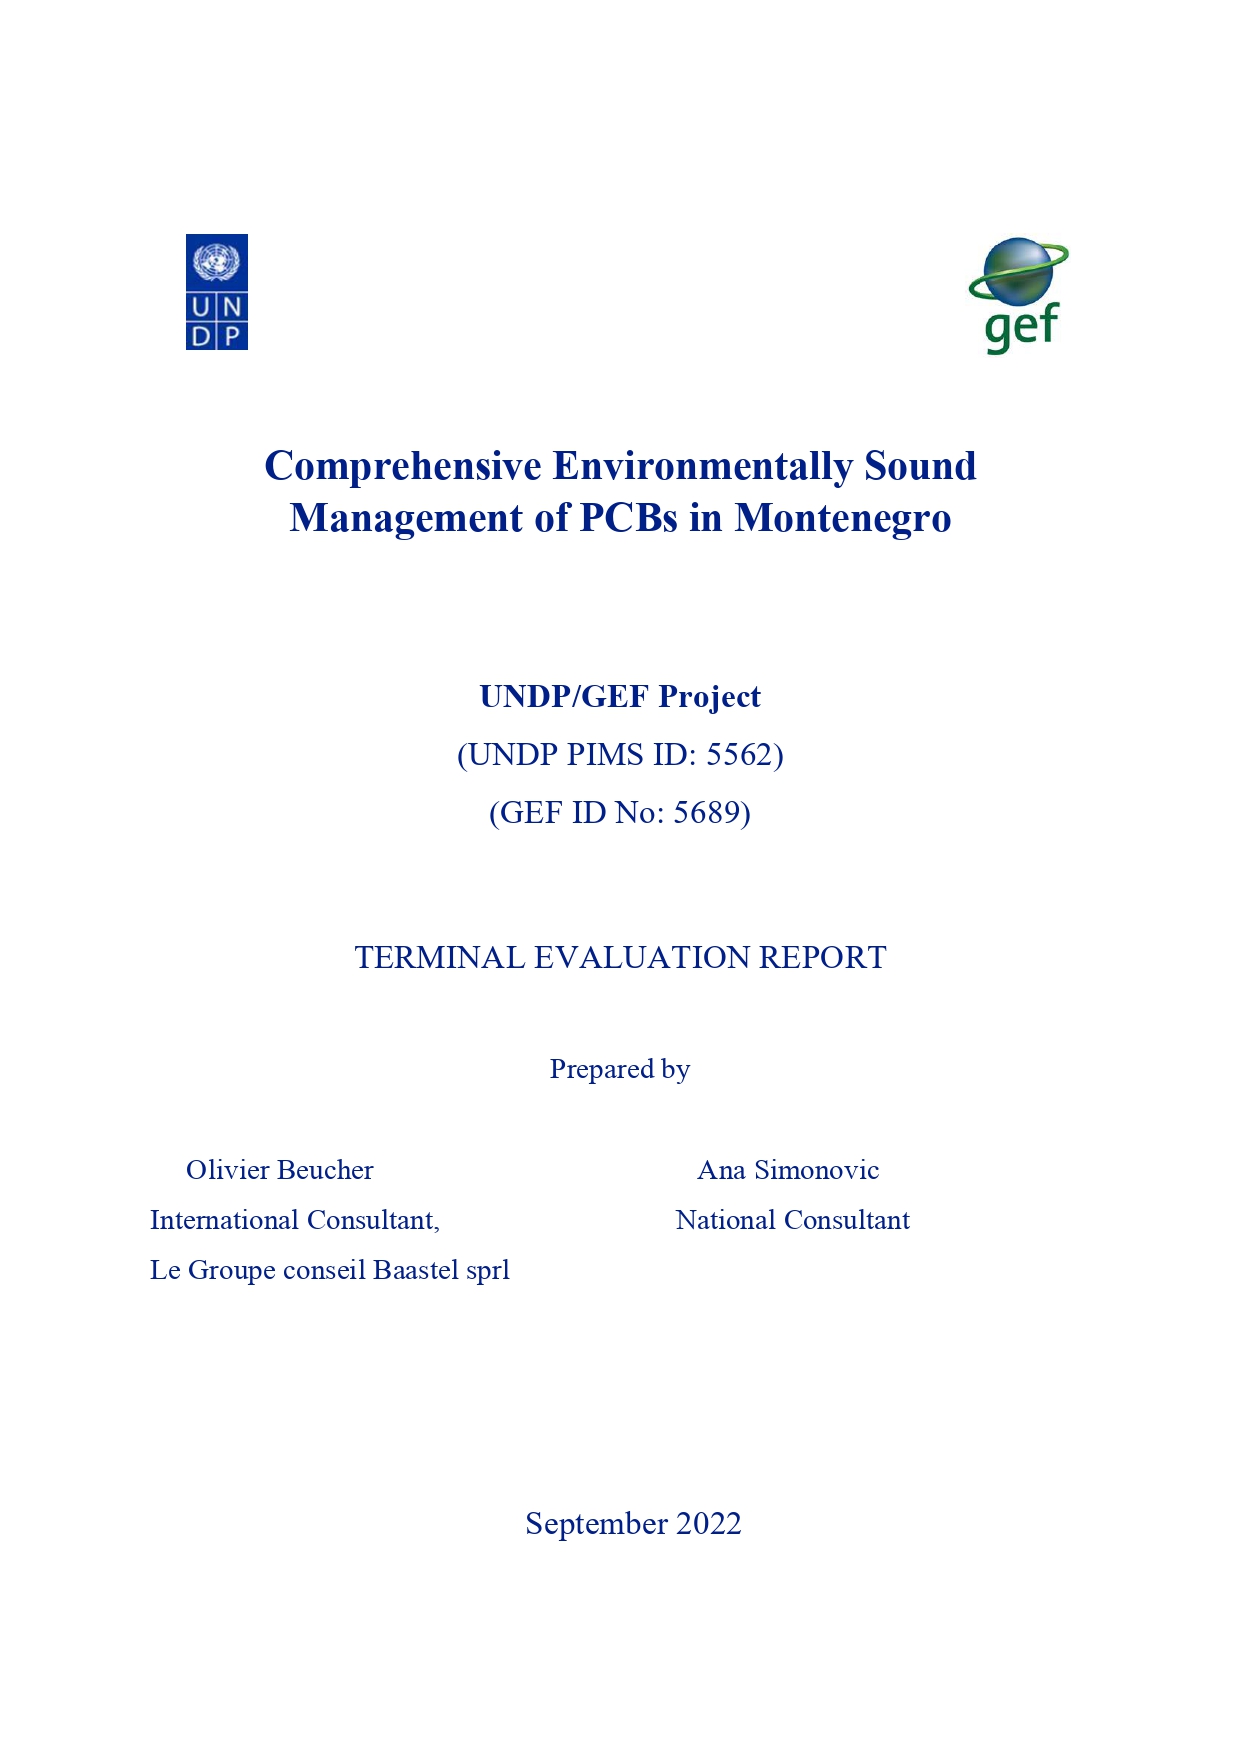 Comprehensive Environmentally Sound Management of PCBs in Montenegro